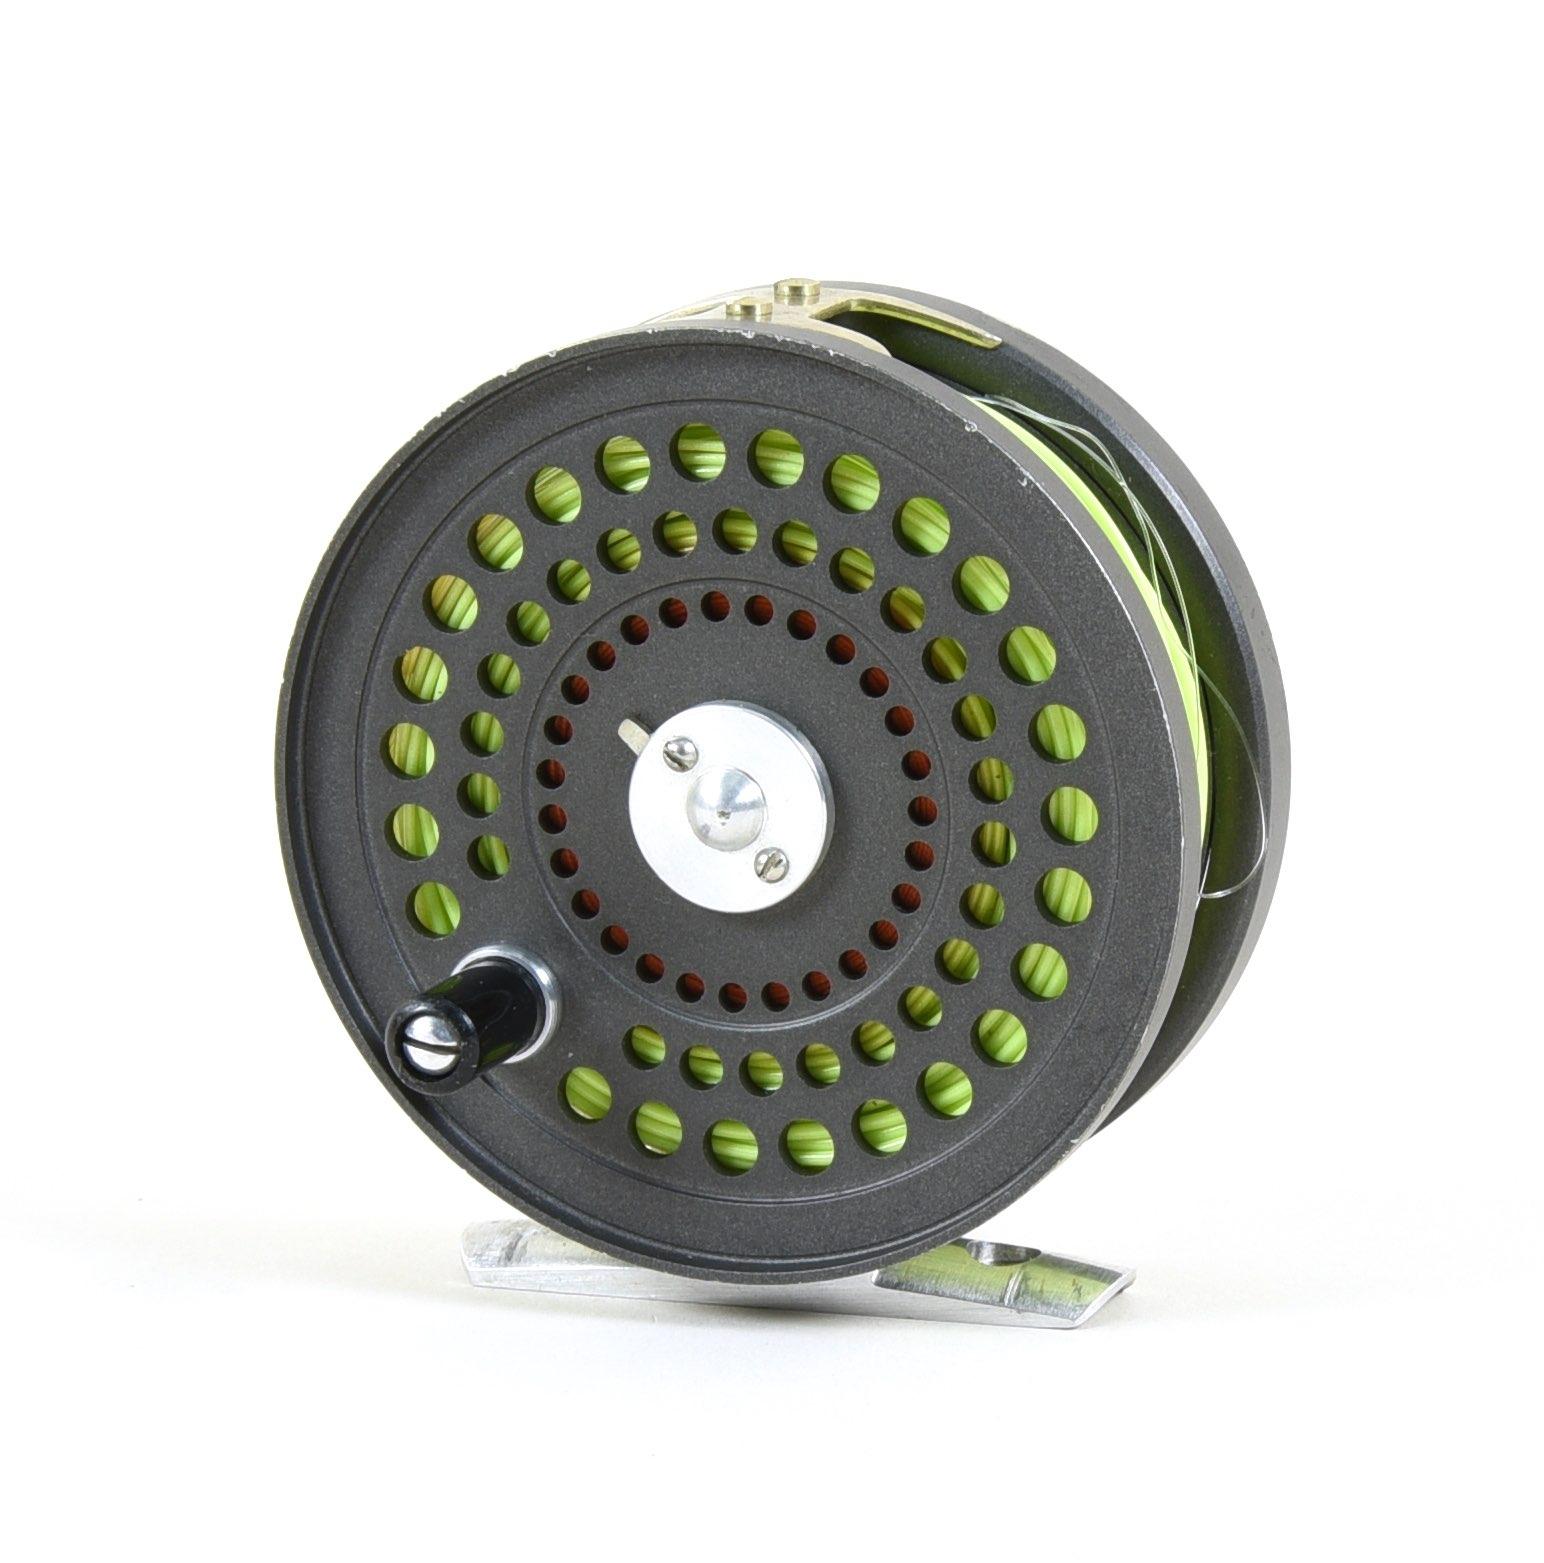 Orvis CFO IV Fly Reel  The Angling Marketplace